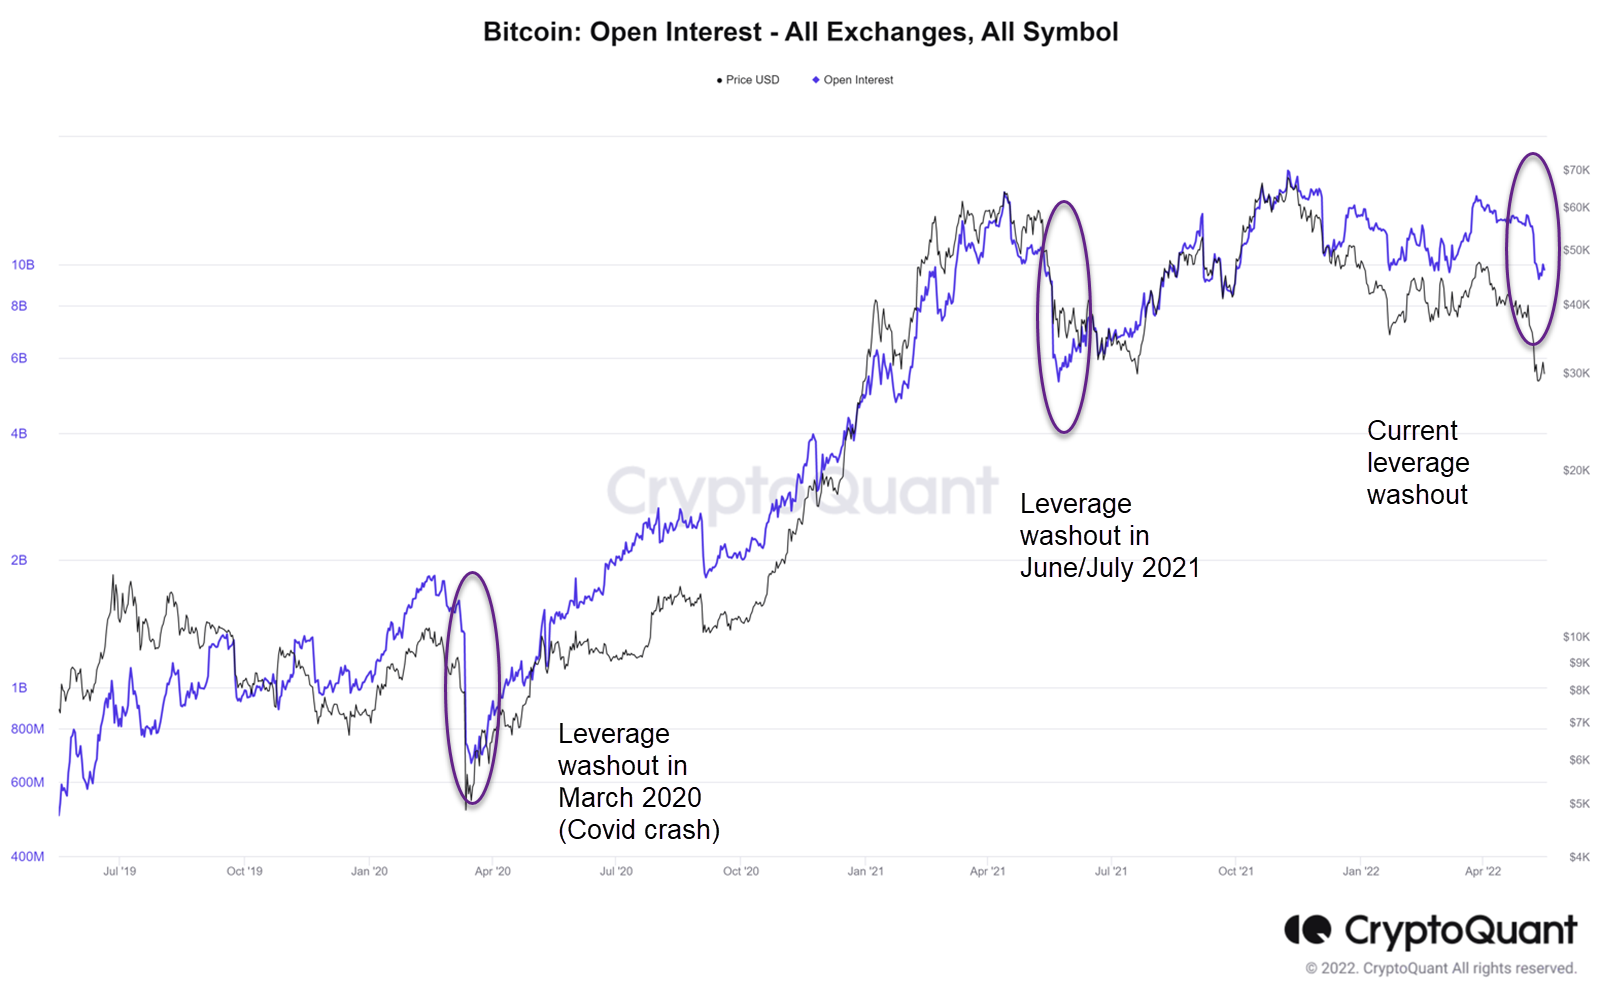 Bitcoin open interest (purple) plotted against bitcoin price. Source: CryptoQuant.